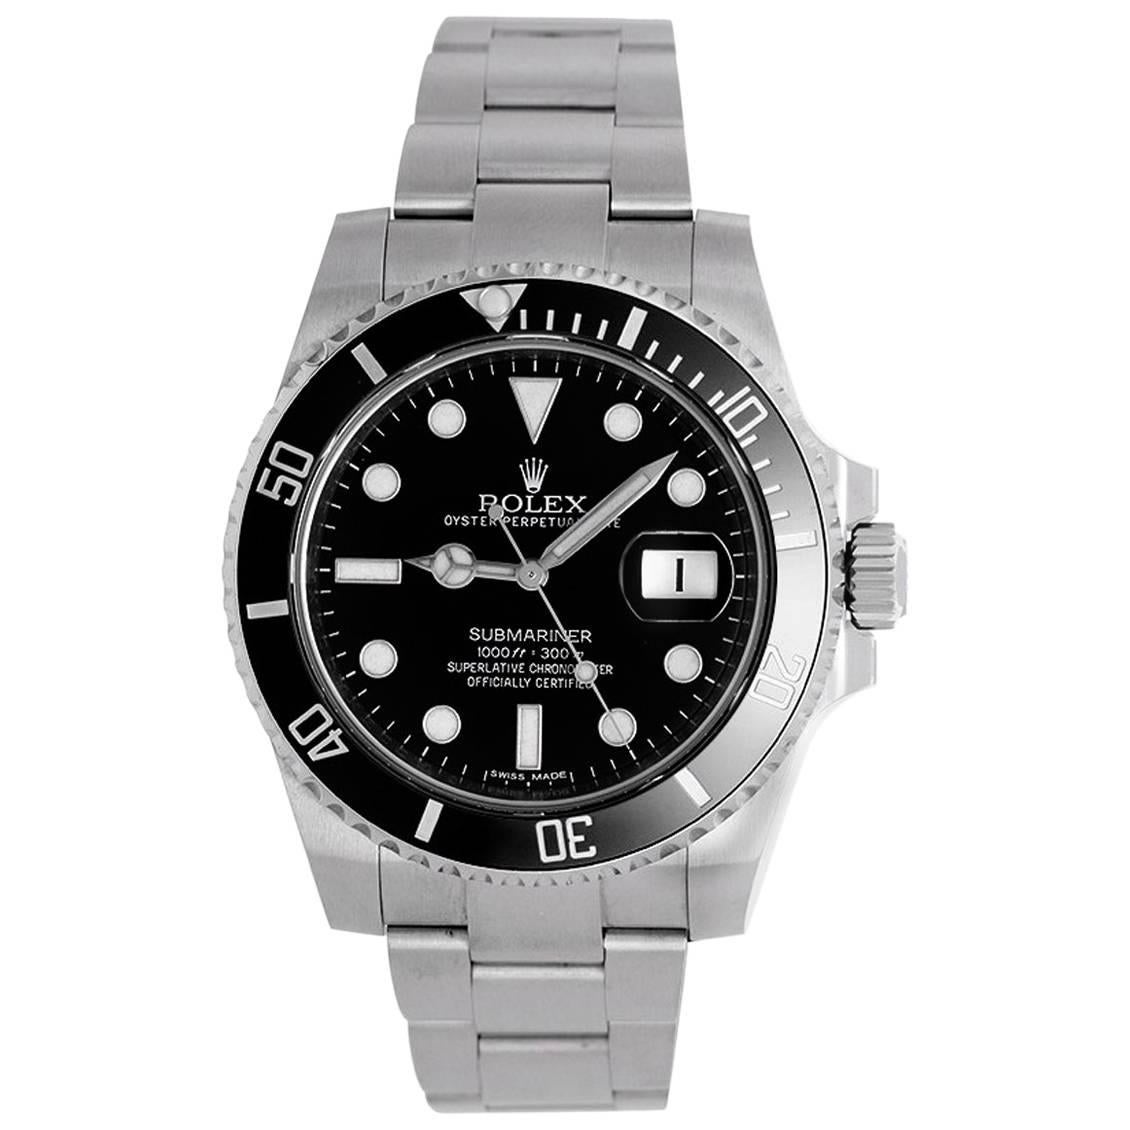 Rolex Stainless Steel Submariner Diver's Automatic Wristwatch Ref 116610